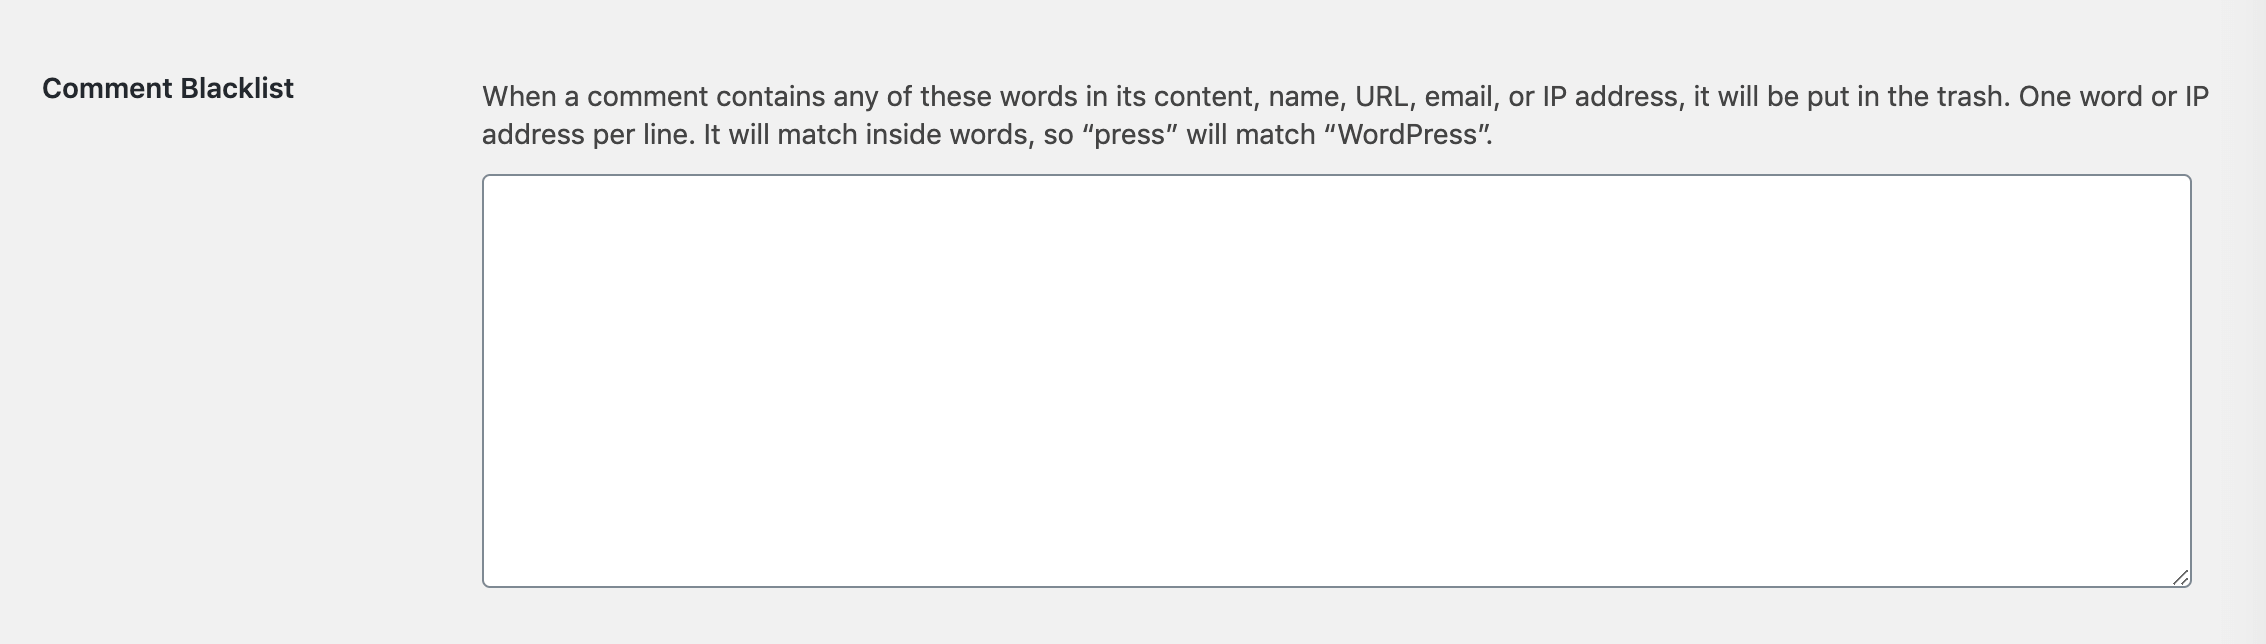 The Comment Blacklist setting in WordPress.